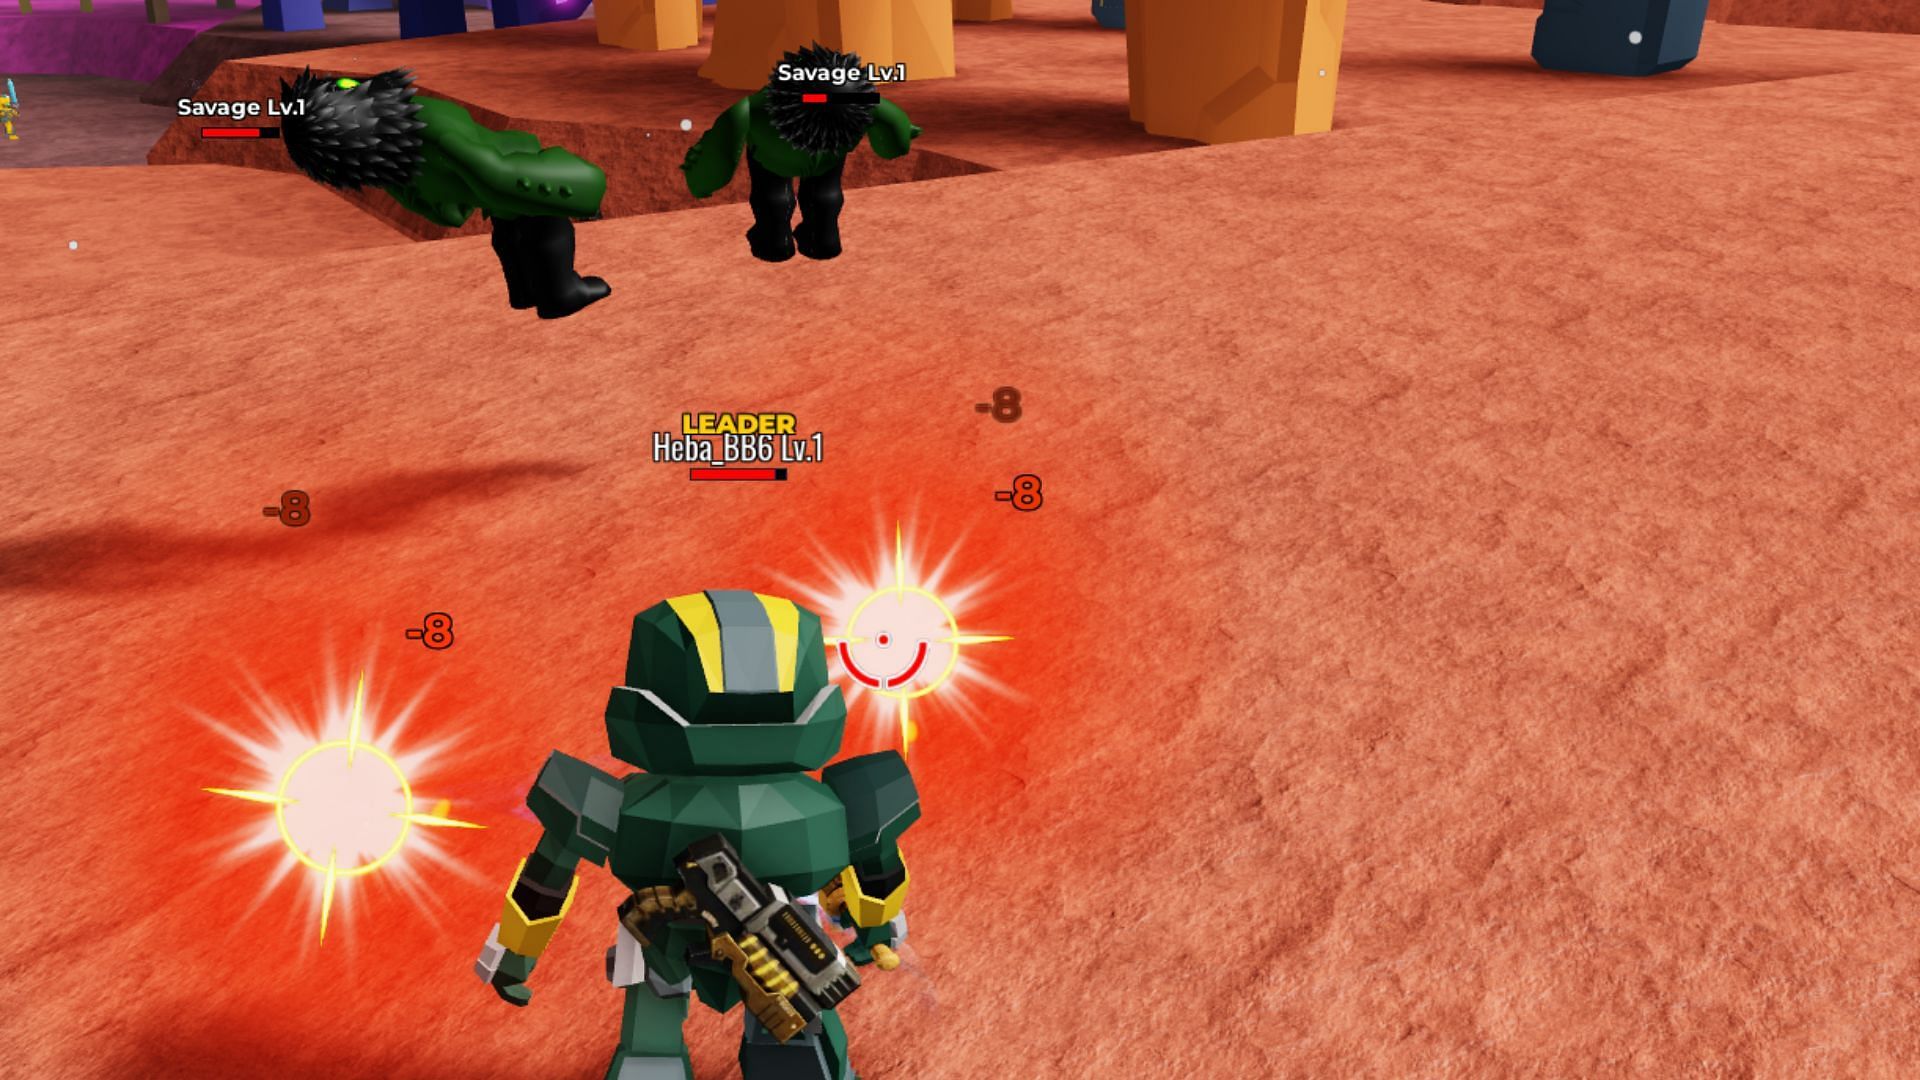 Easily kill savages in Mech Smash (Image via Roblox)